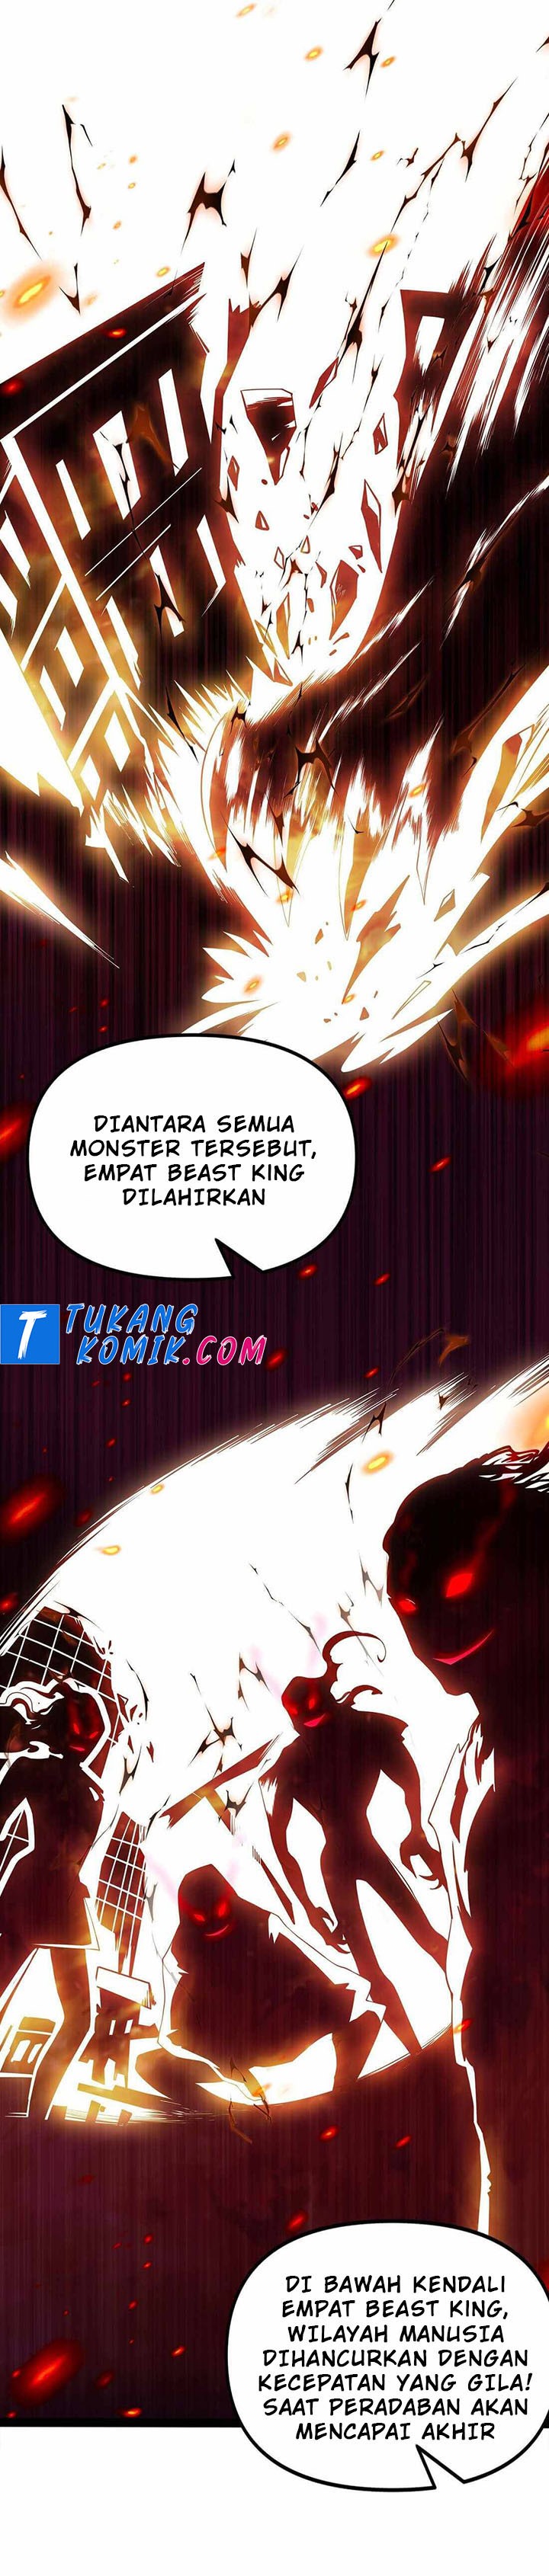 Dilarang COPAS - situs resmi www.mangacanblog.com - Komik age of the gods the world becomes an online game 001 - chapter 1 2 Indonesia age of the gods the world becomes an online game 001 - chapter 1 Terbaru 10|Baca Manga Komik Indonesia|Mangacan